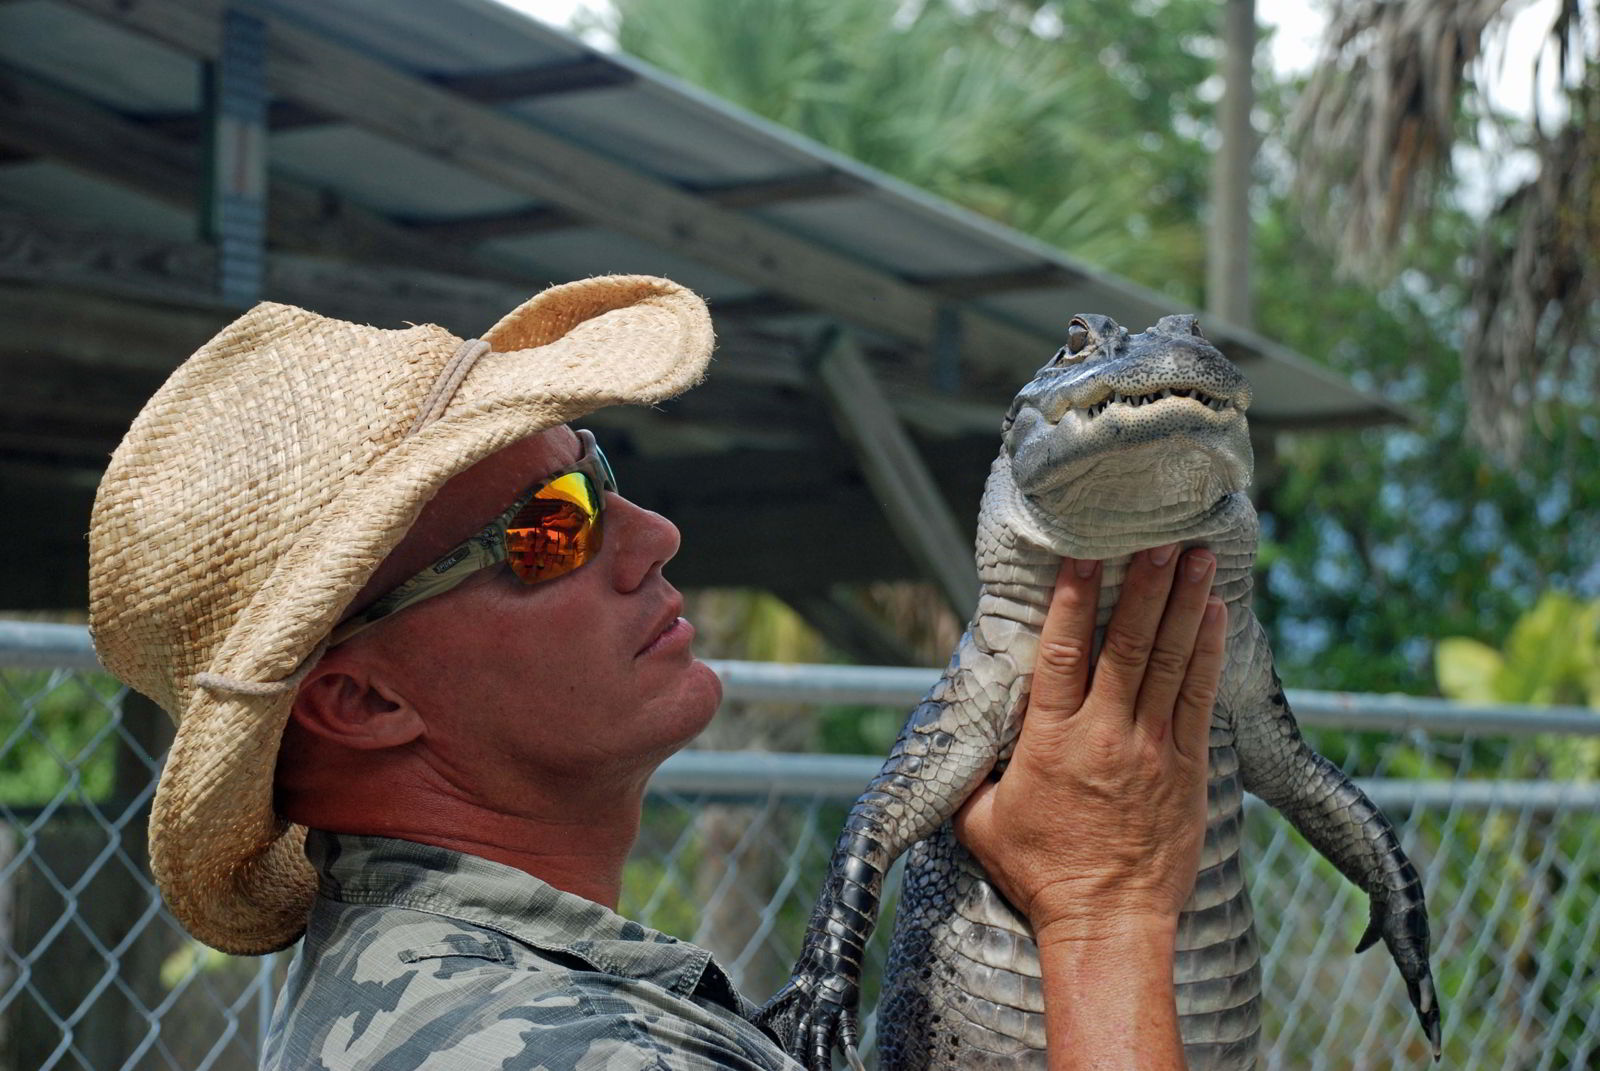 An image of the animal handler at Wooten's Everglades Airboat Tours